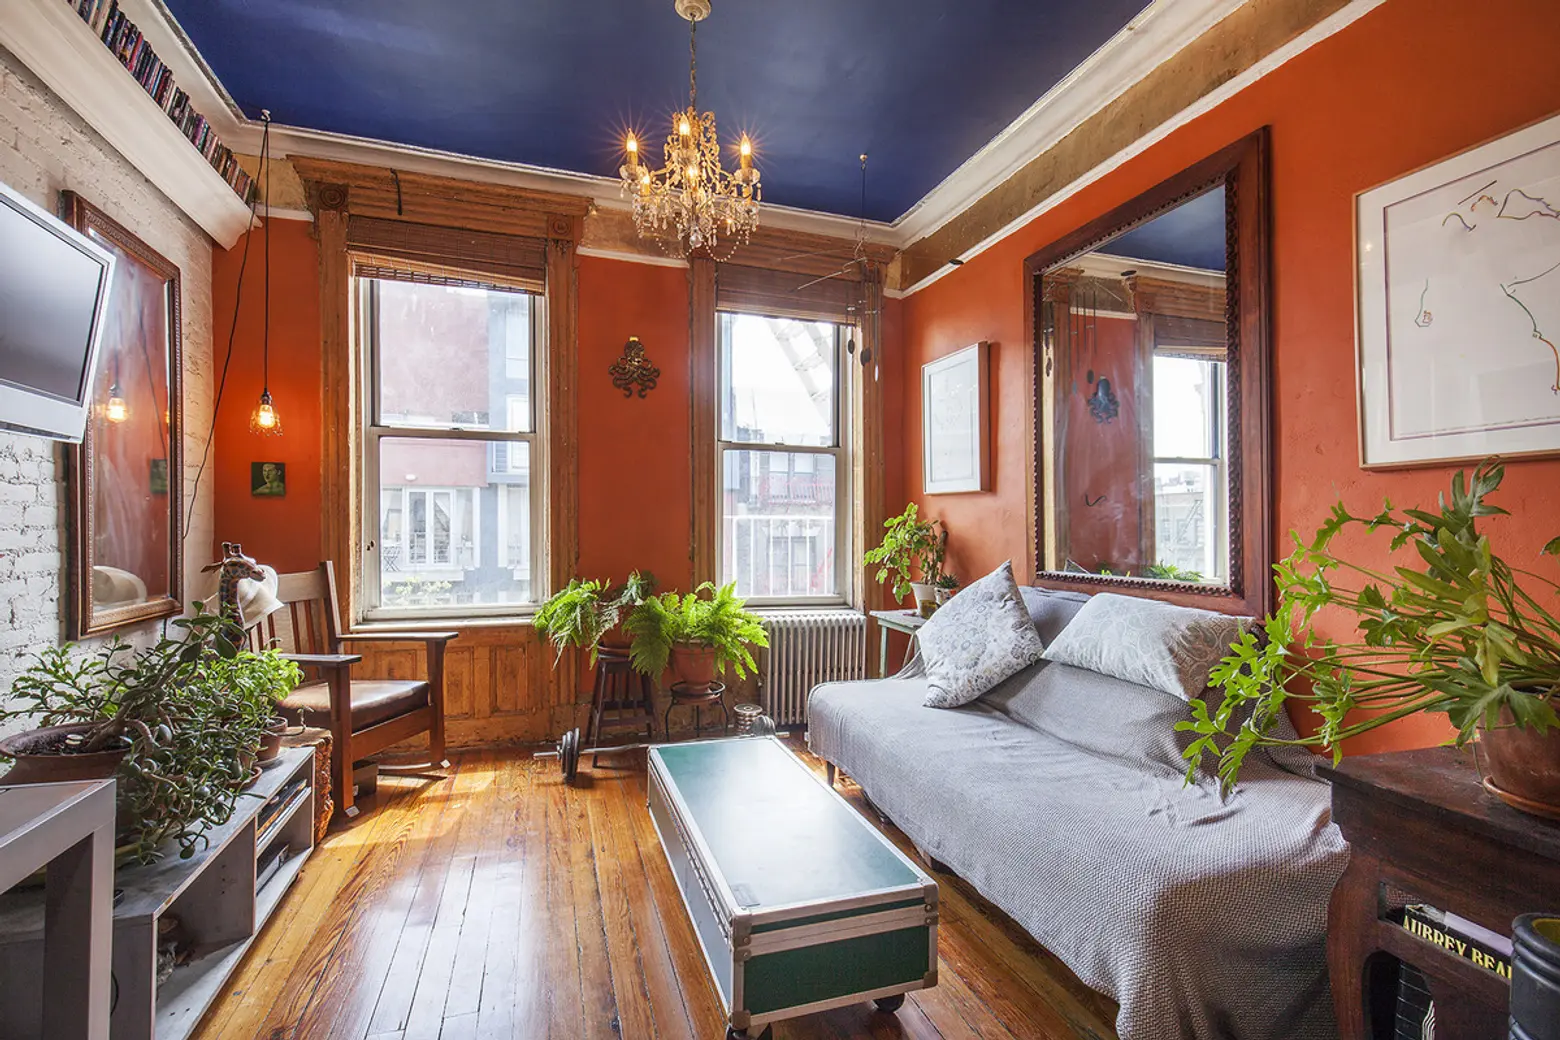 Bright and Charming One-Bedroom in Alphabet City Is Surprisingly Affordable at $485k